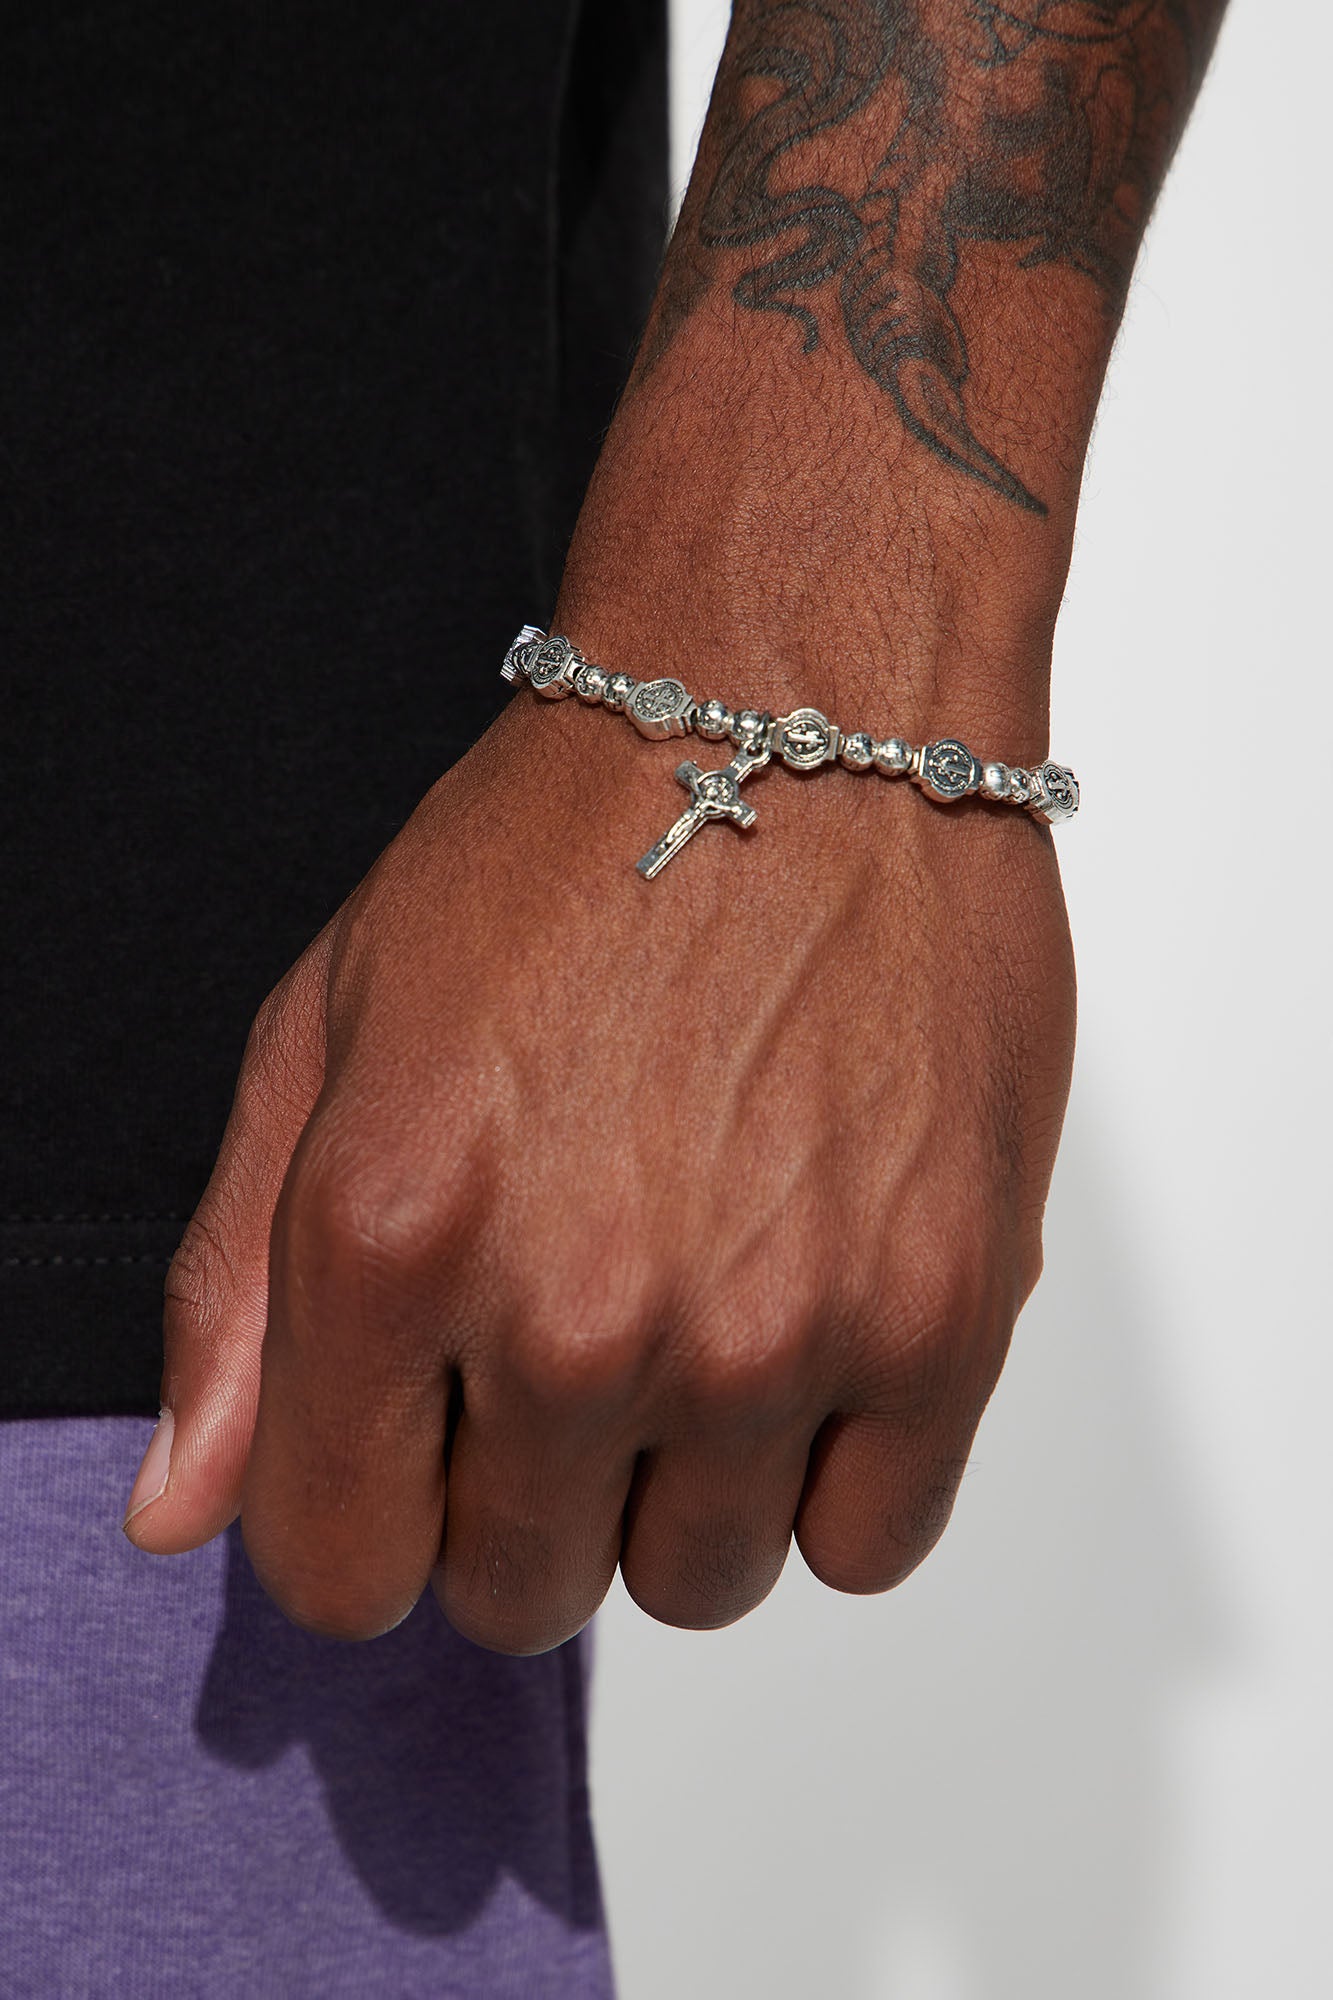 Stainless Steel Silver-Tone Mens Religious Jesus Link Chain Bracelet with  Clasp | eBay